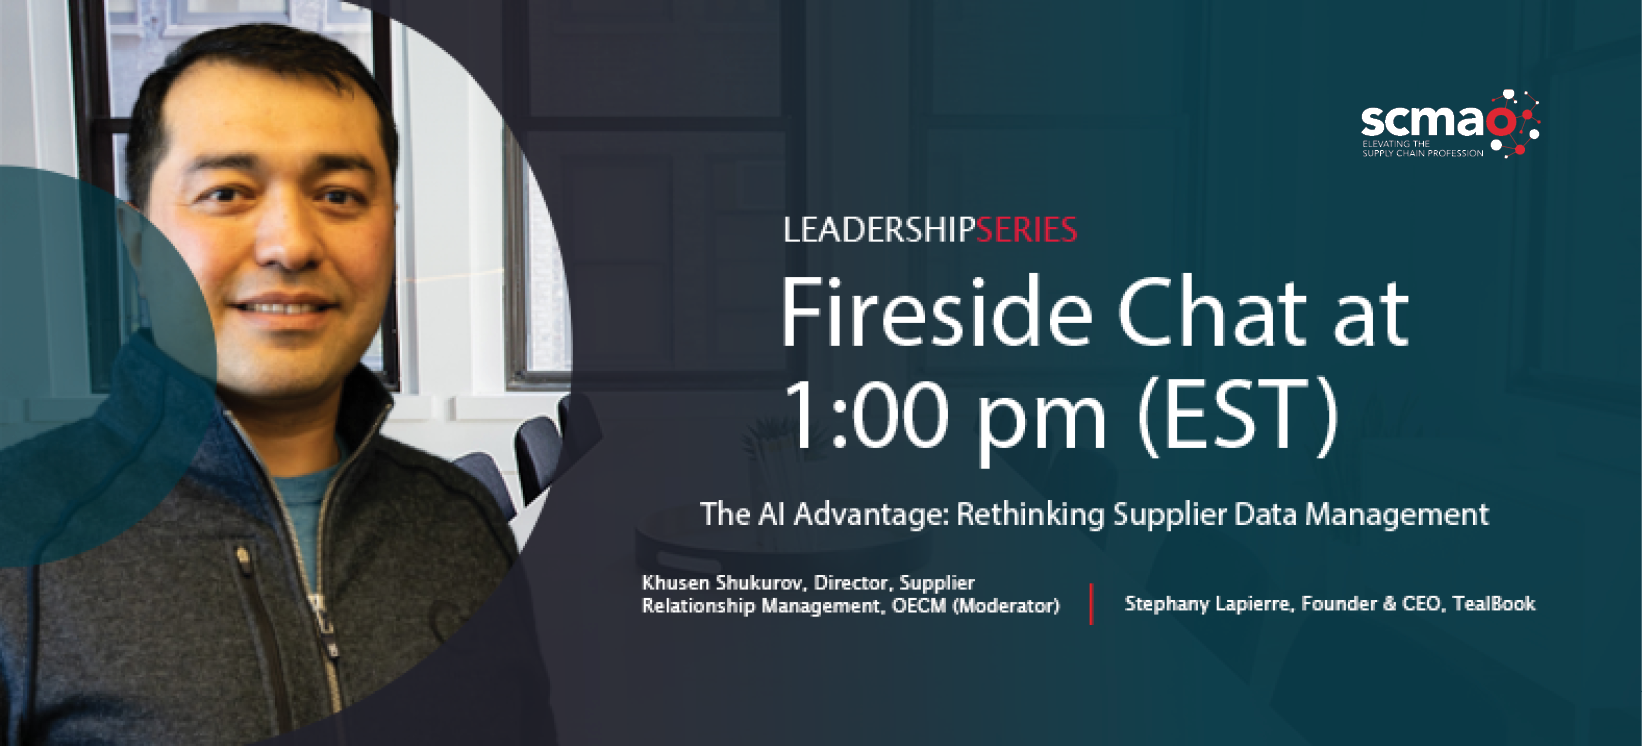 Fireside Chat at 1:00PM with KhusenShukurov . OECM's Director, Supplier Relationship Management